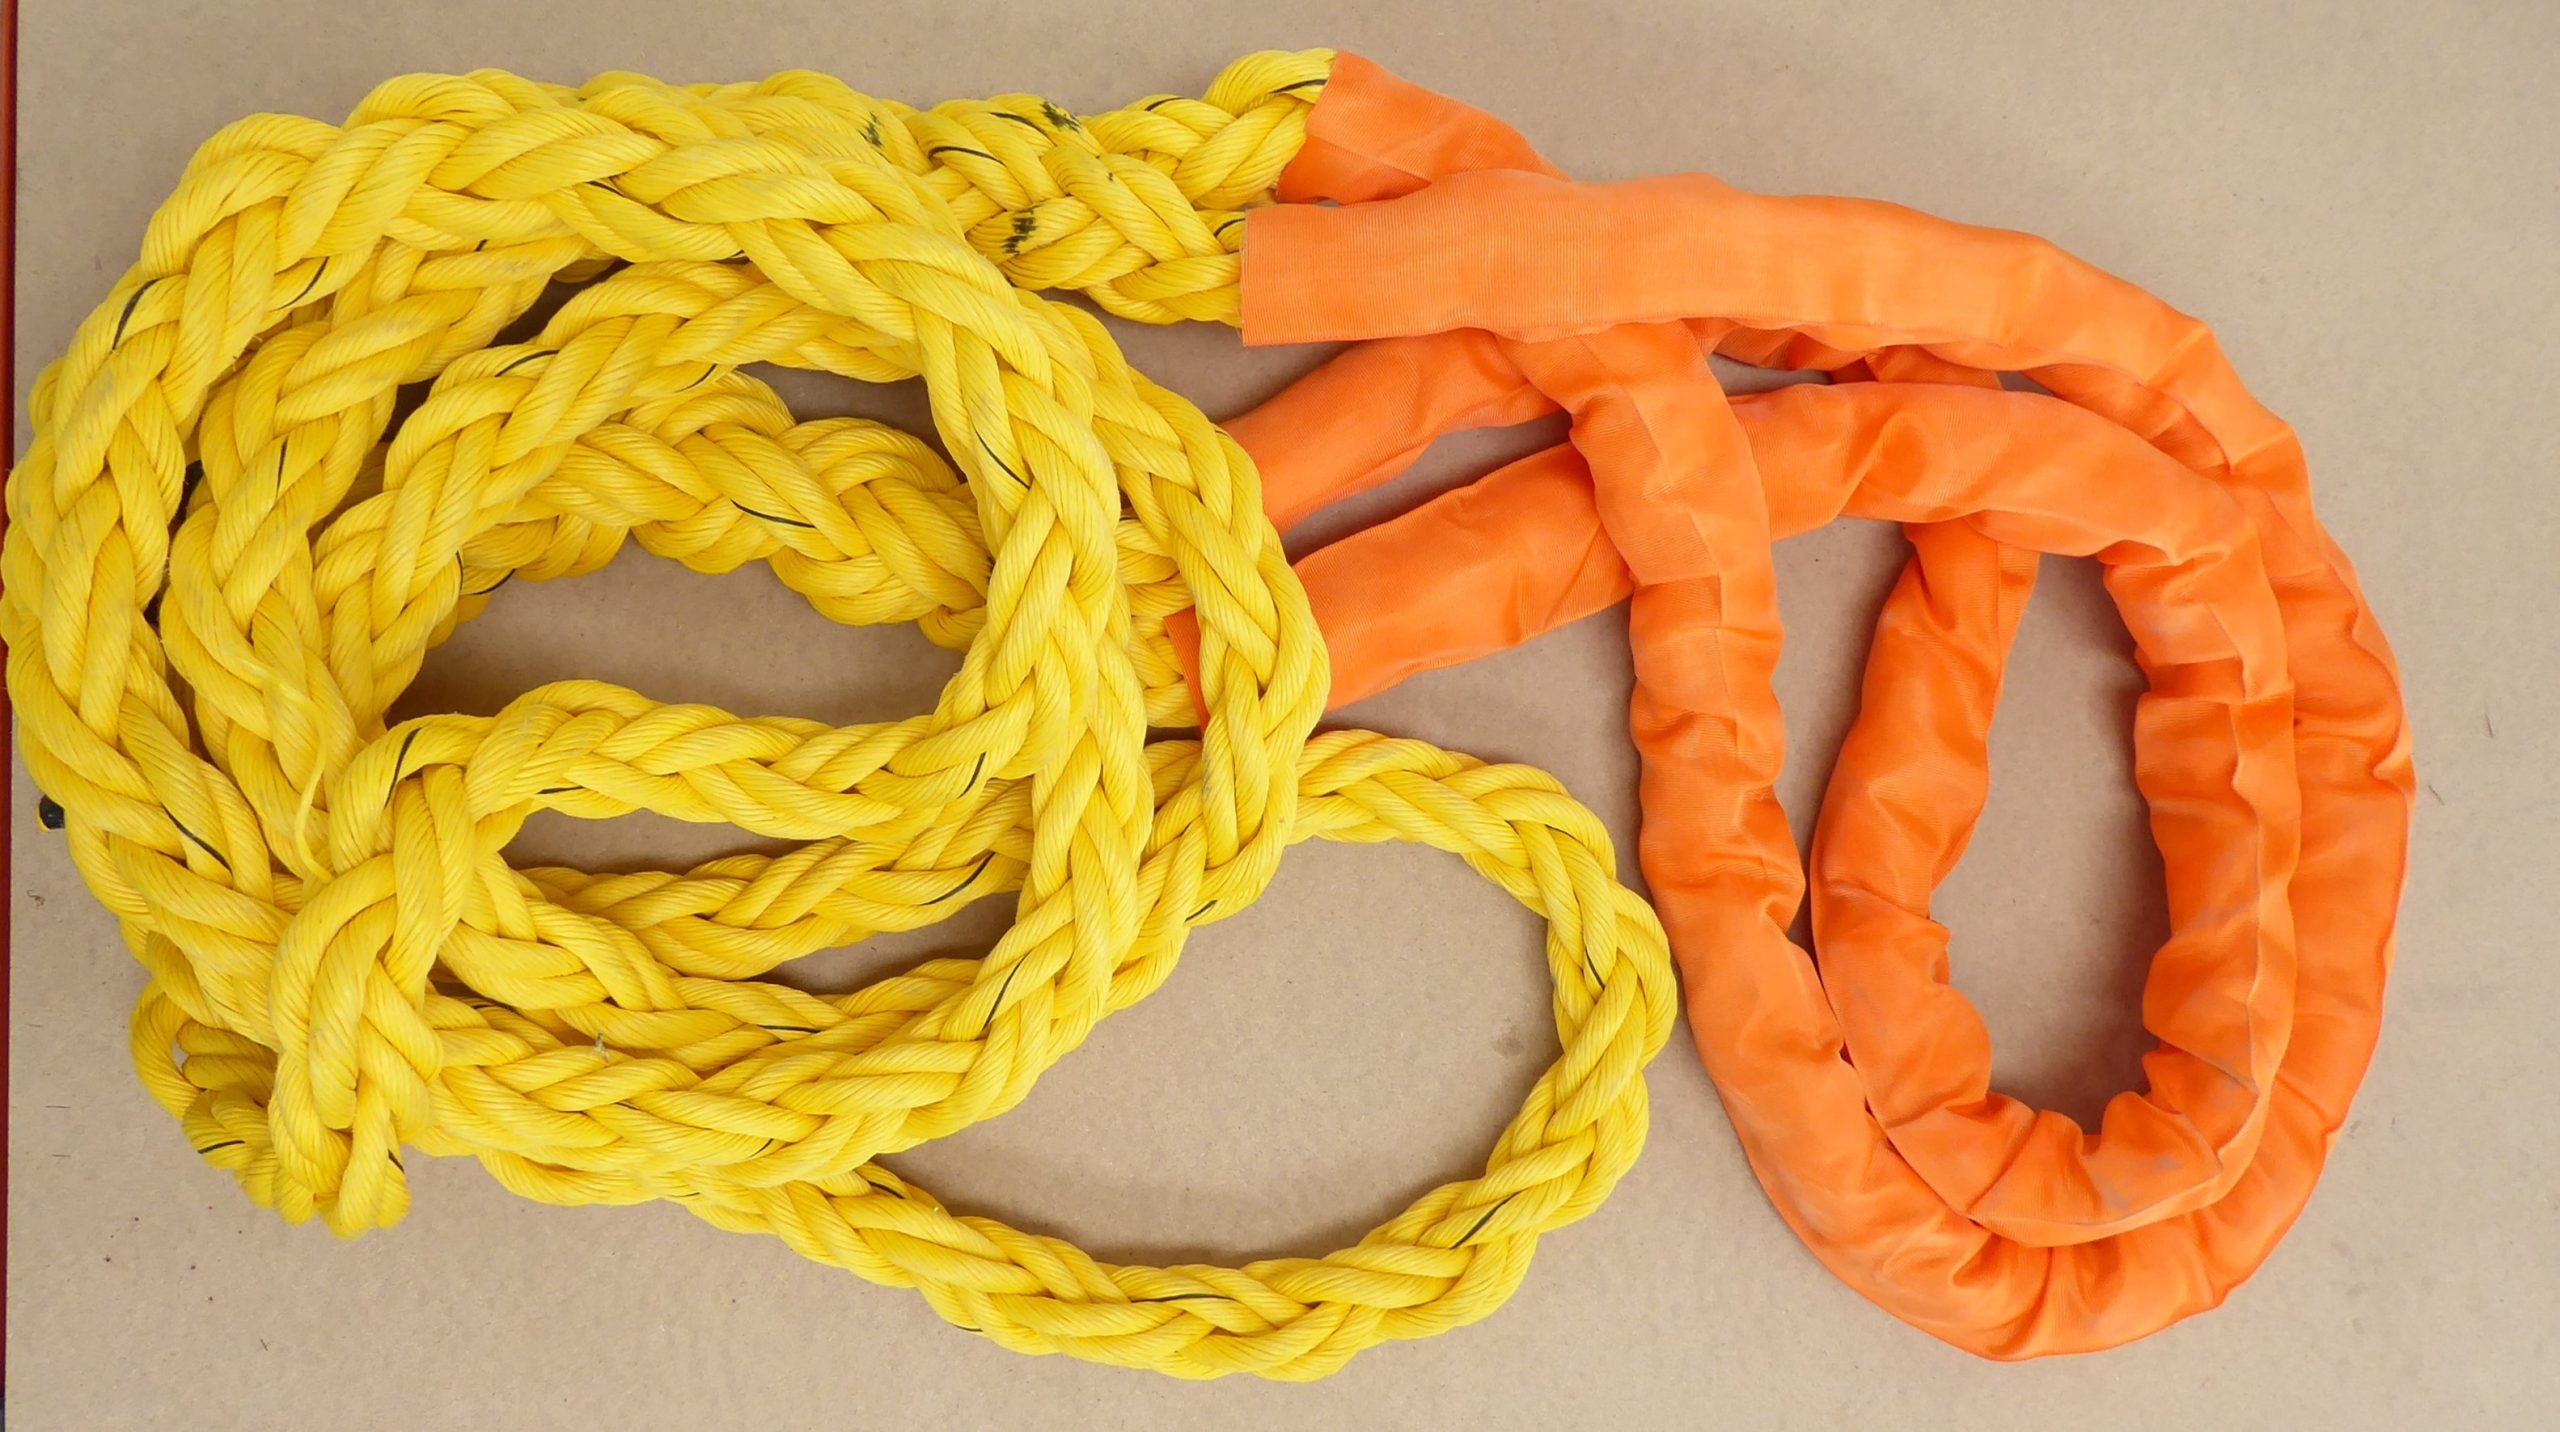 48mm HMPE rope from Ropes Direct